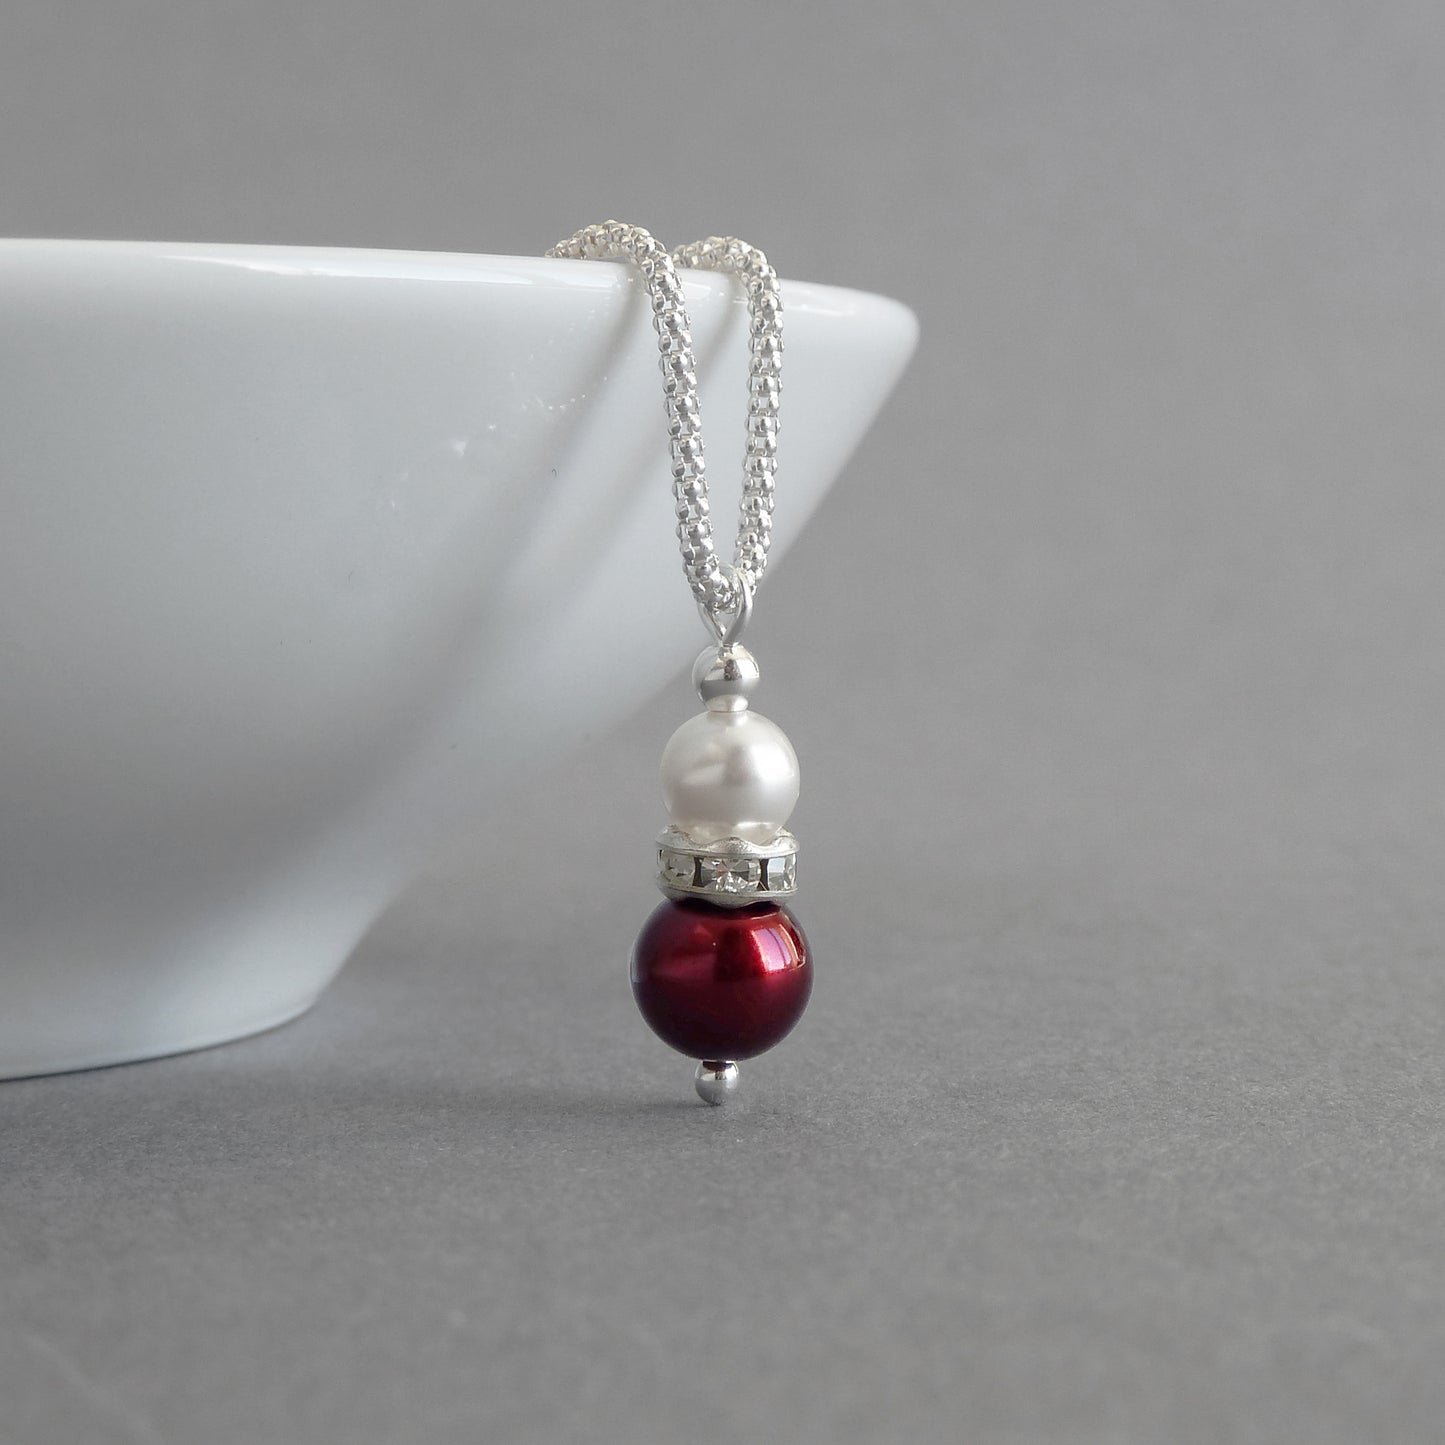 Burgundy pearl pendant necklace